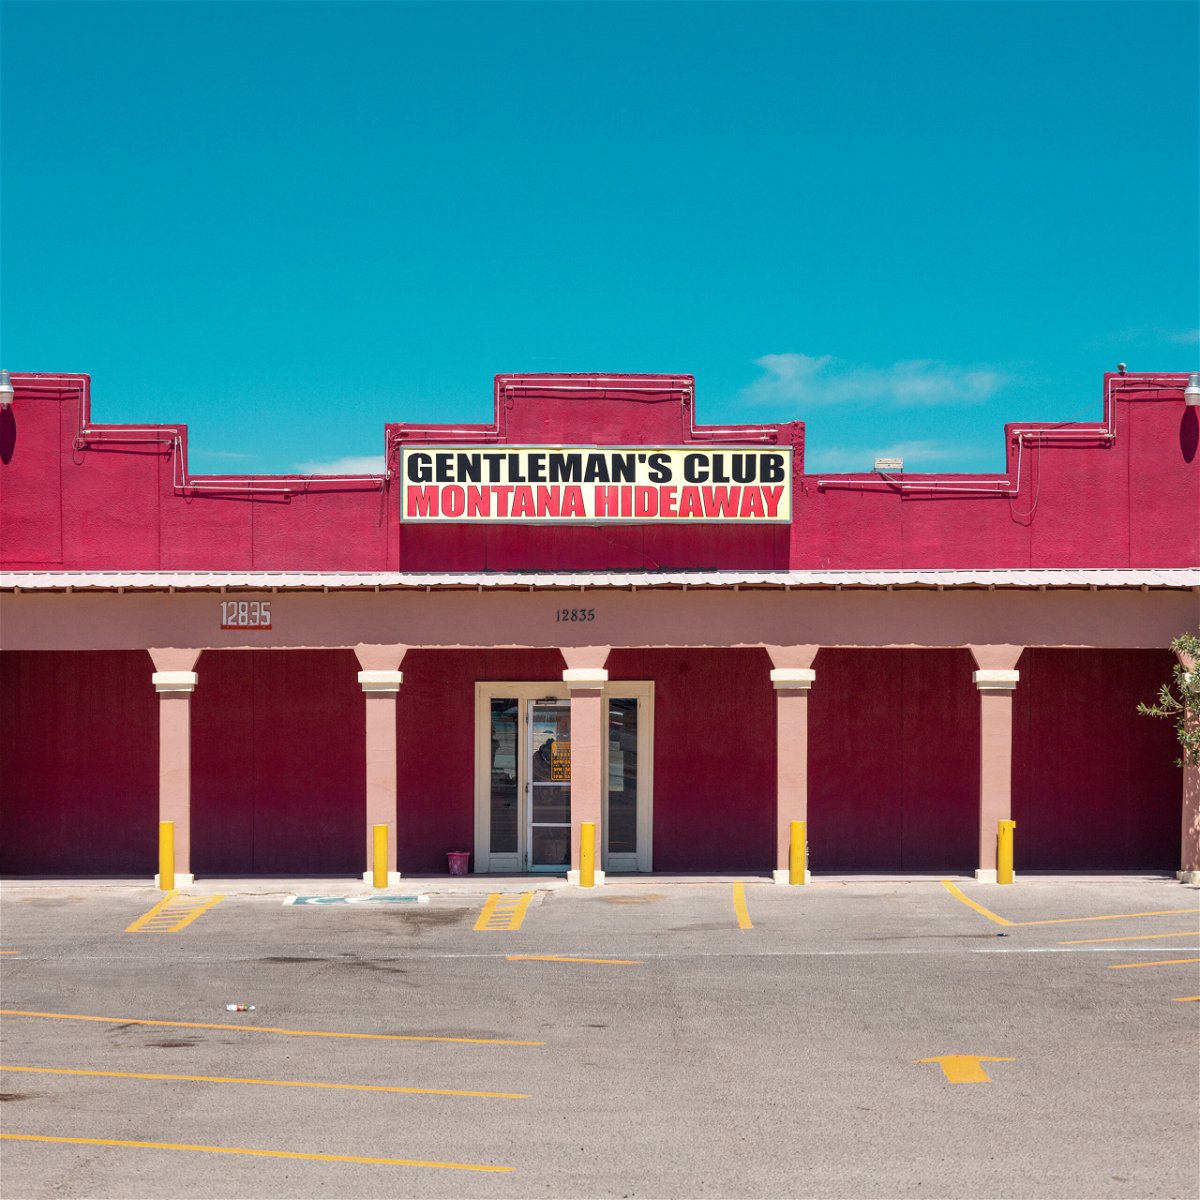 <i>Francois Prost</i><br/>An image of a strip club in America by photographer François Prost.